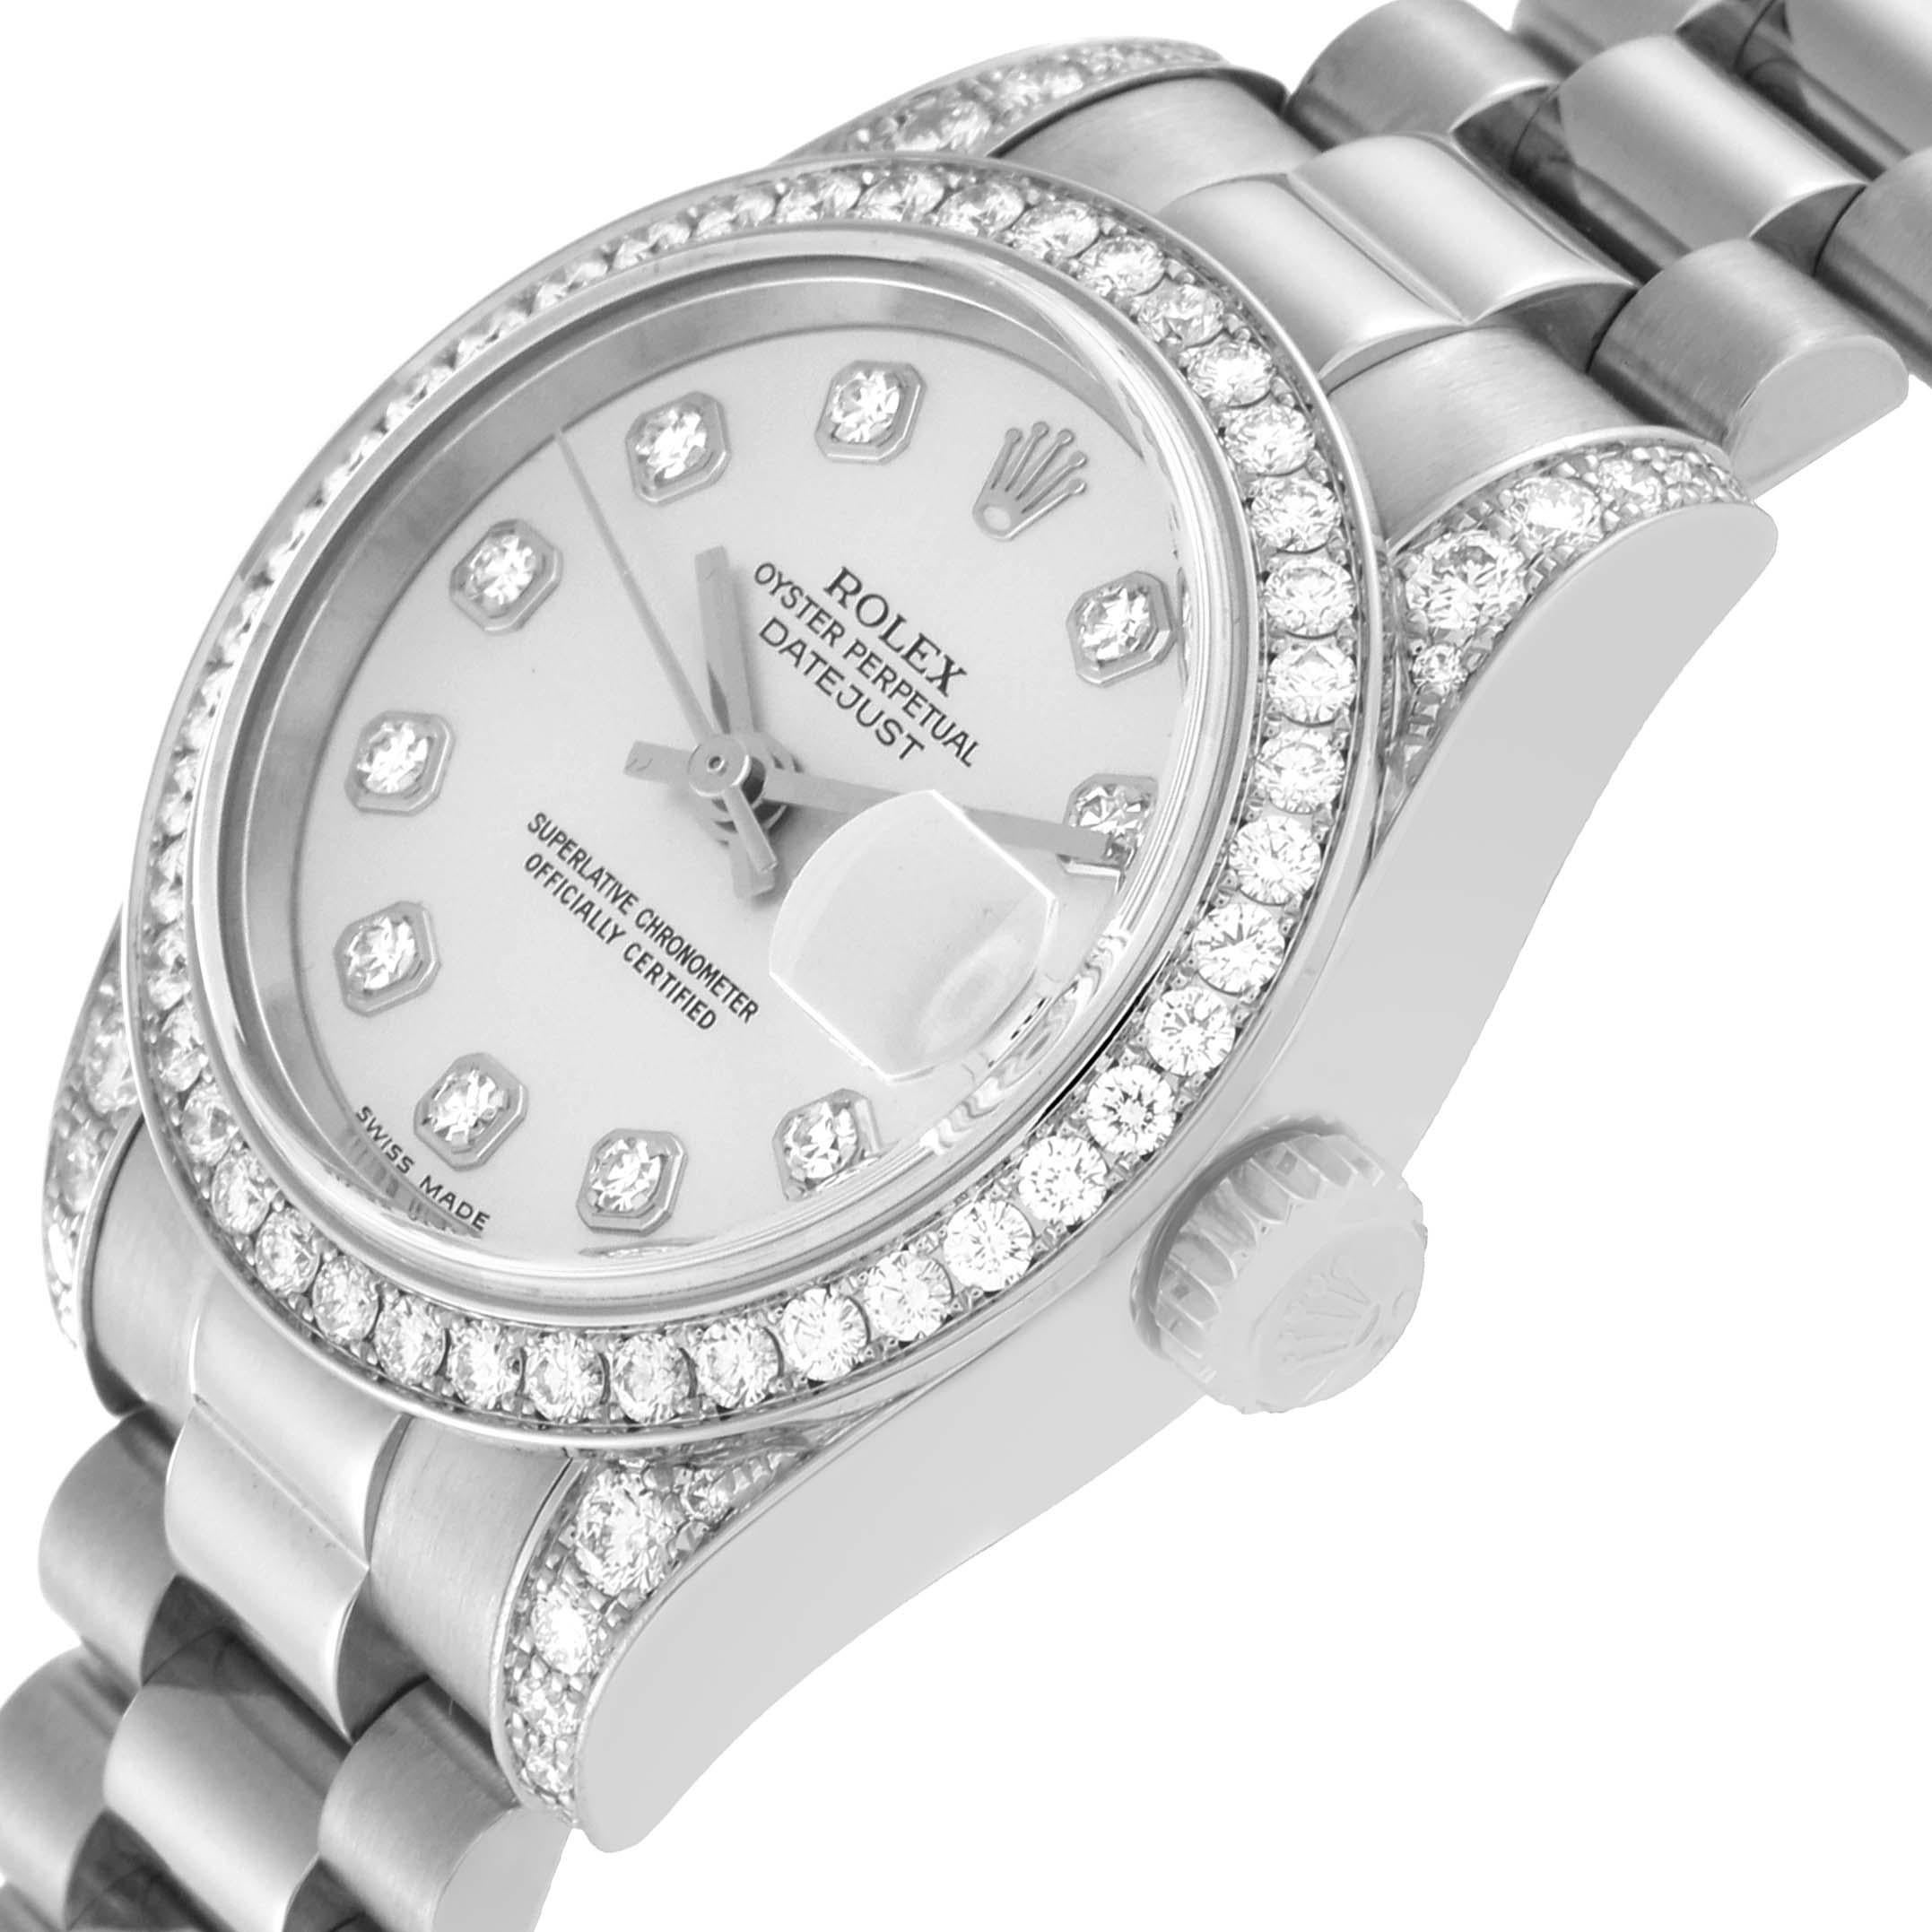 Rolex Datejust President White Gold Diamond Bezel Ladies Watch 179159 Box Papers In Excellent Condition For Sale In Atlanta, GA